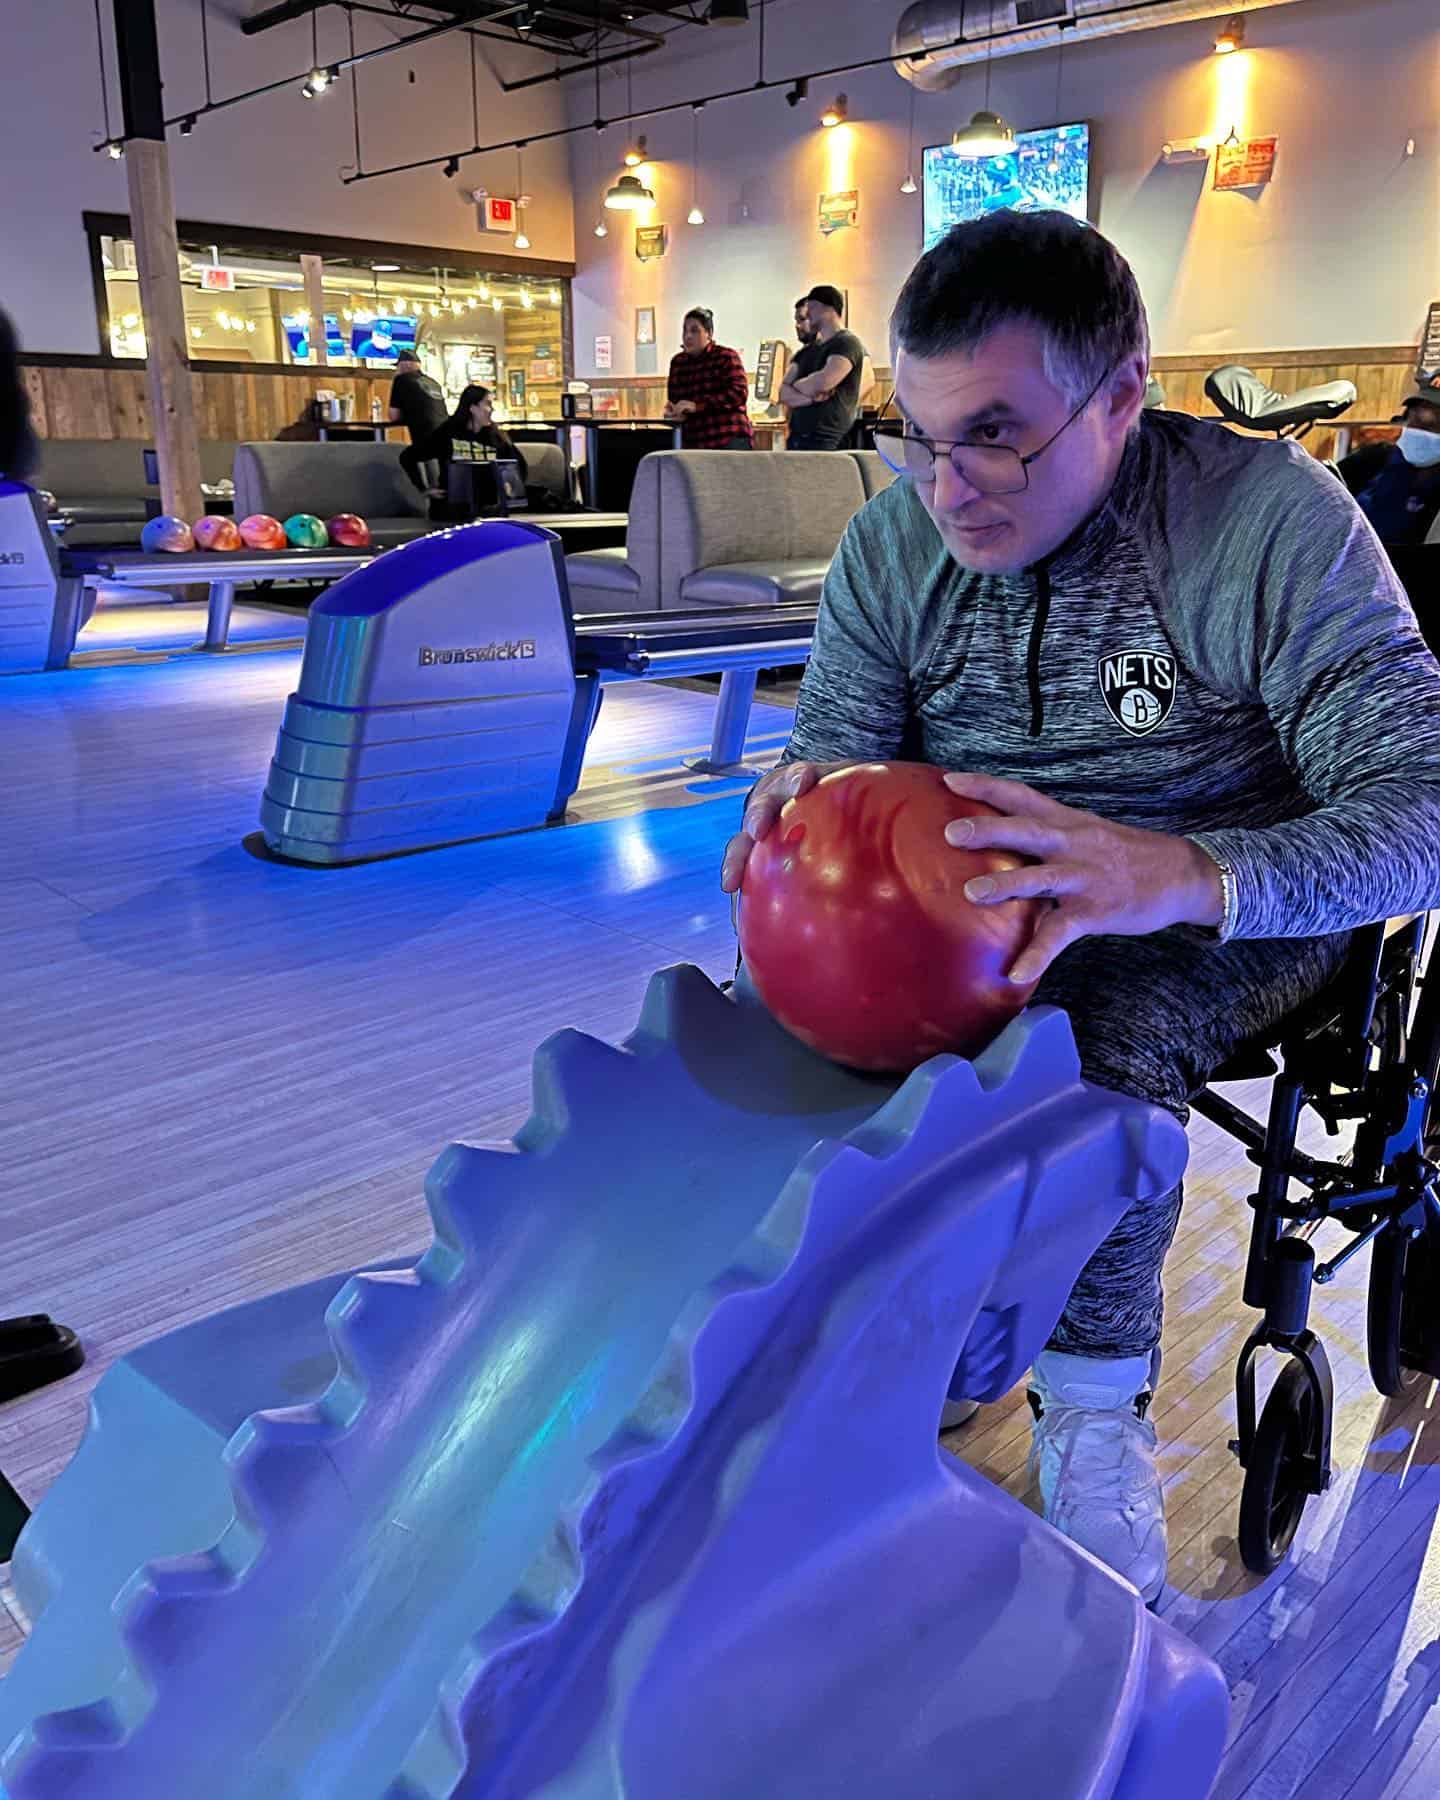 A physically disabled man in a wheelchair getting ready to bowl with an orange bowling ball in a bowling alley.